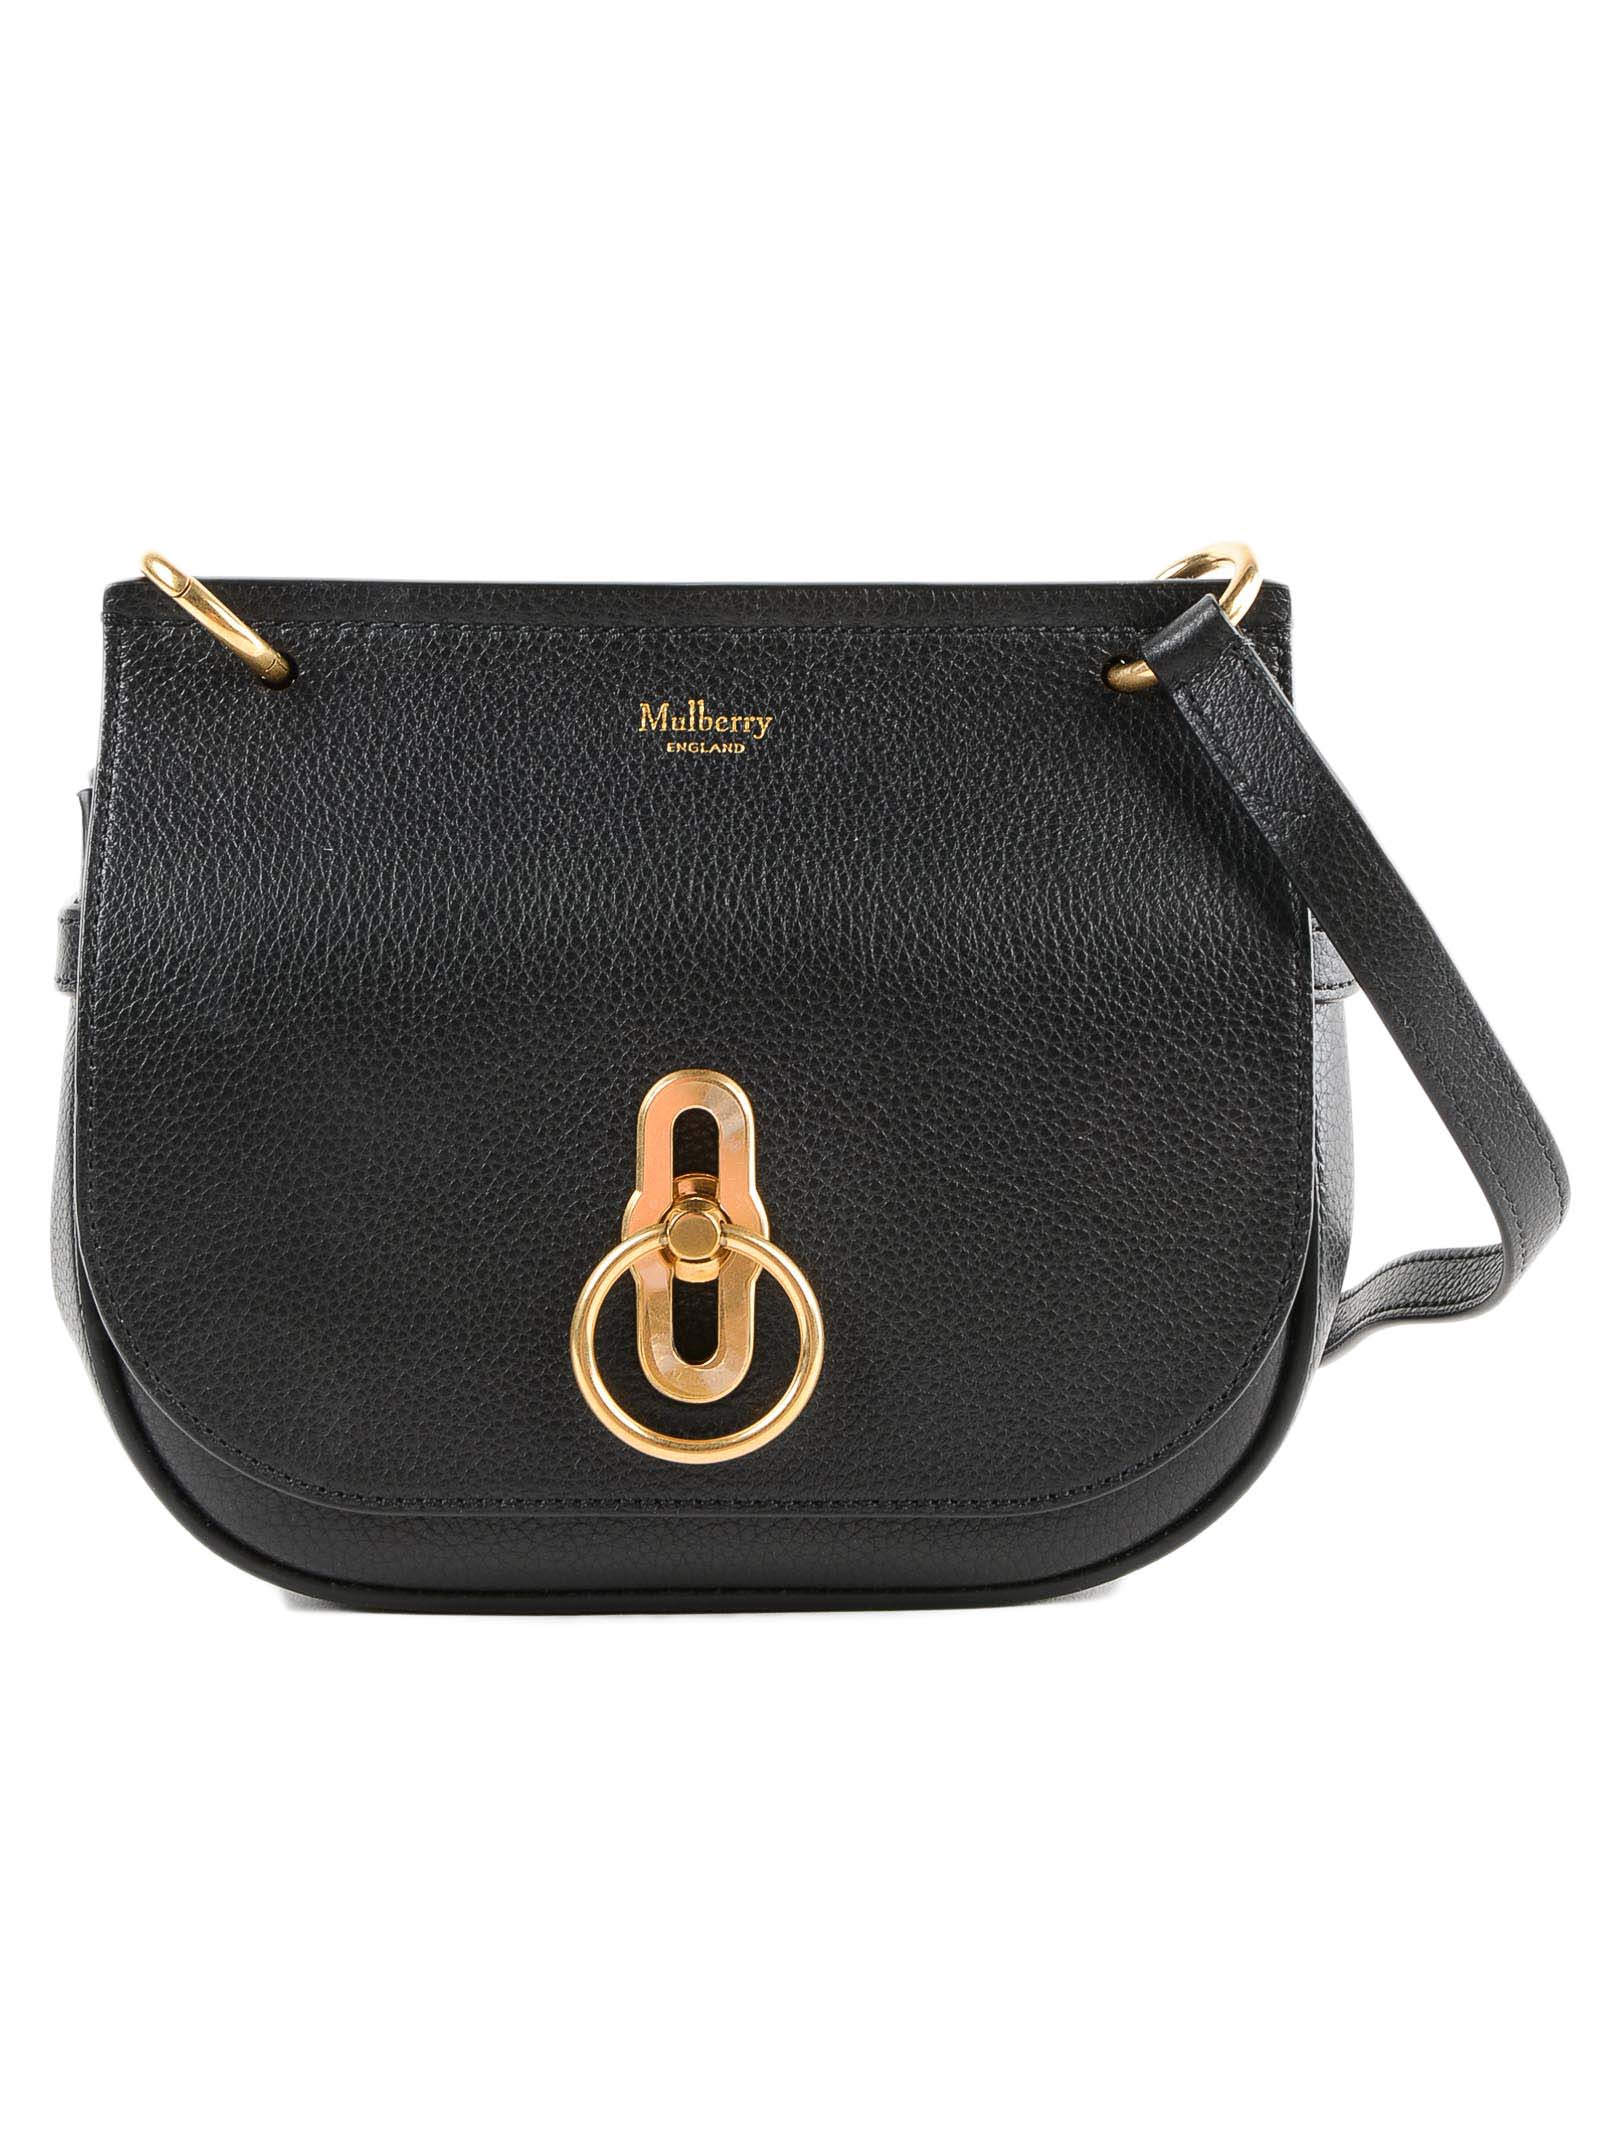 Mulberry Mulberry Small Amberley Shoulder Bag - Black - 10975203 | italist